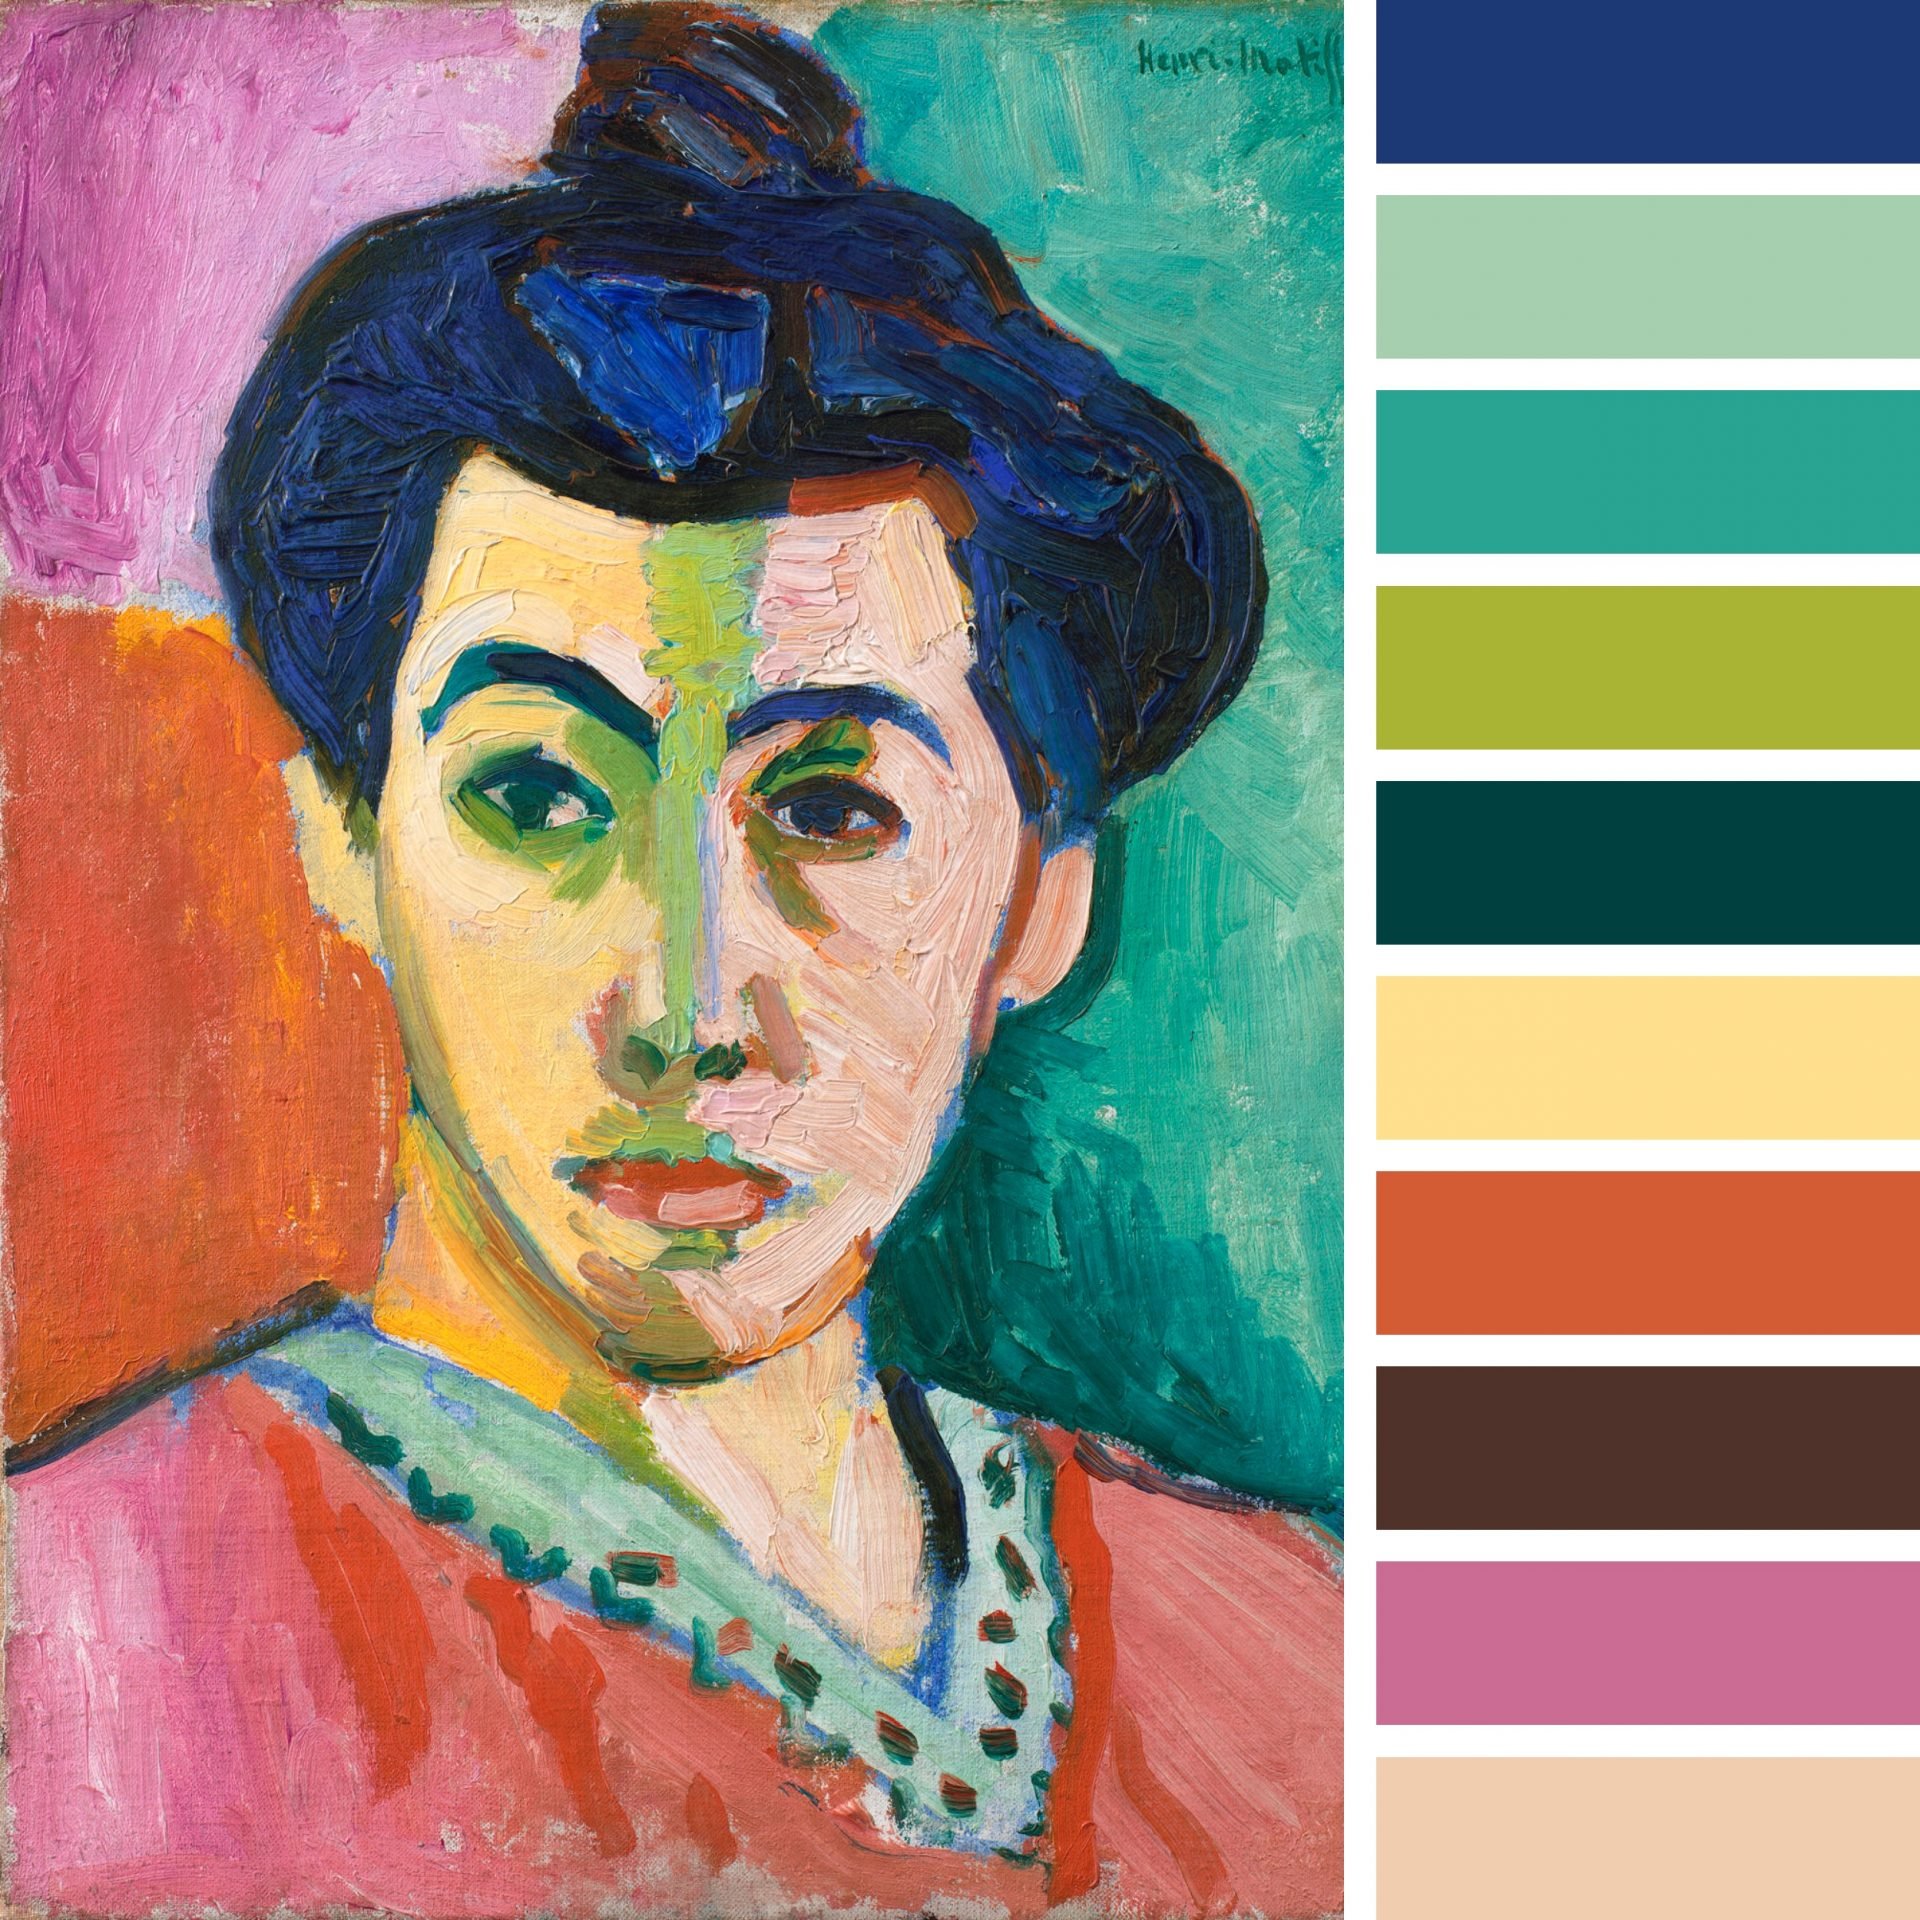 This image shows "Portrait of Madame Matisse. The Green Line," a Fauvist painting from 1905 by Henri Matisse. It is a striking portrait of Matisse's wife with bold, non-representational colors and a distinctive green stripe down the center of her face. Her features are rendered in patches of color rather than with detailed realism, with her skin tones varying from pale to pink, and her dress featuring splashes of red with green accents. The background is divided into blocks of color, with a pinkish hue to the left and a warm orange to the right, exemplifying the Fauvist color palette. The overall effect is one of dynamic and vibrant color contrasts that encapsulate the Fauvist movement's release of color from descriptive accuracy, allowing it to act with its own expressive power.